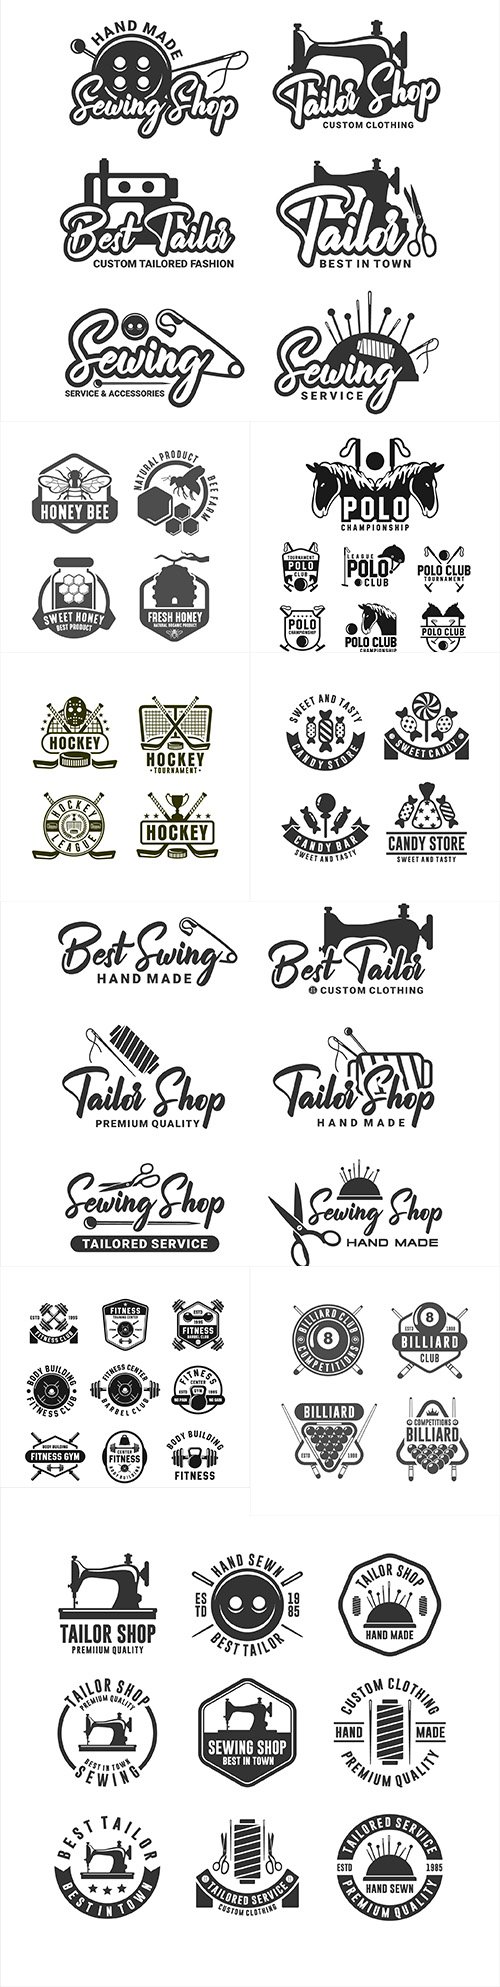 Best Logo and Black White Logo Collection